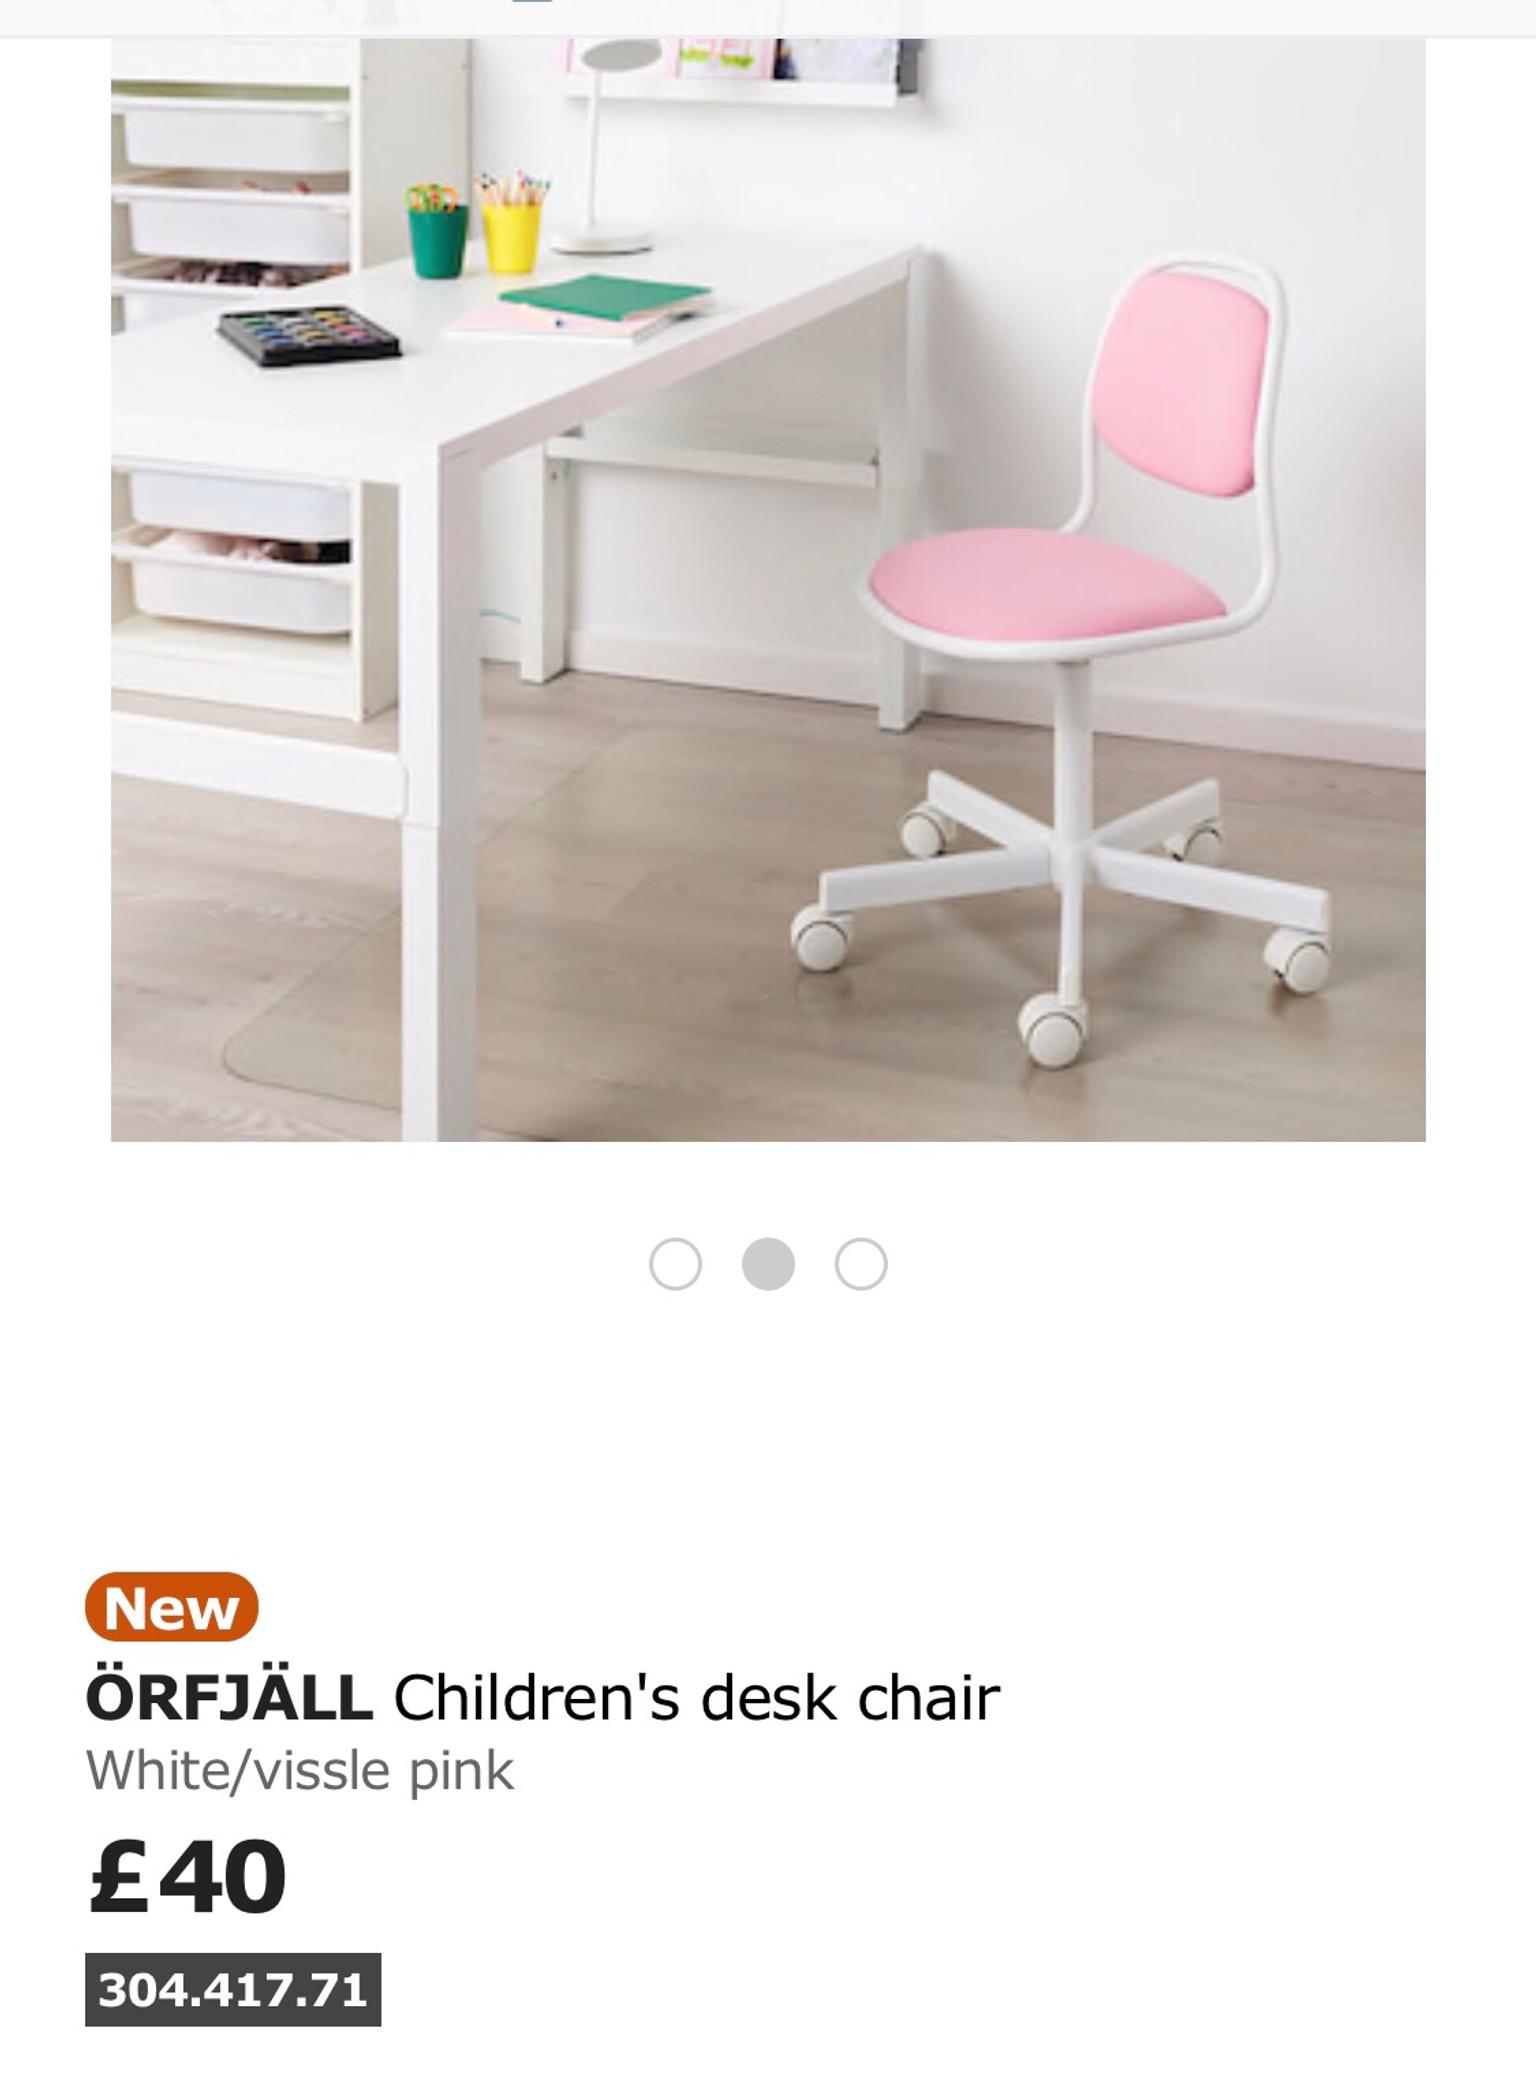 Ikea Child S Desk Chair Pink In W1f Westminster For 10 00 For